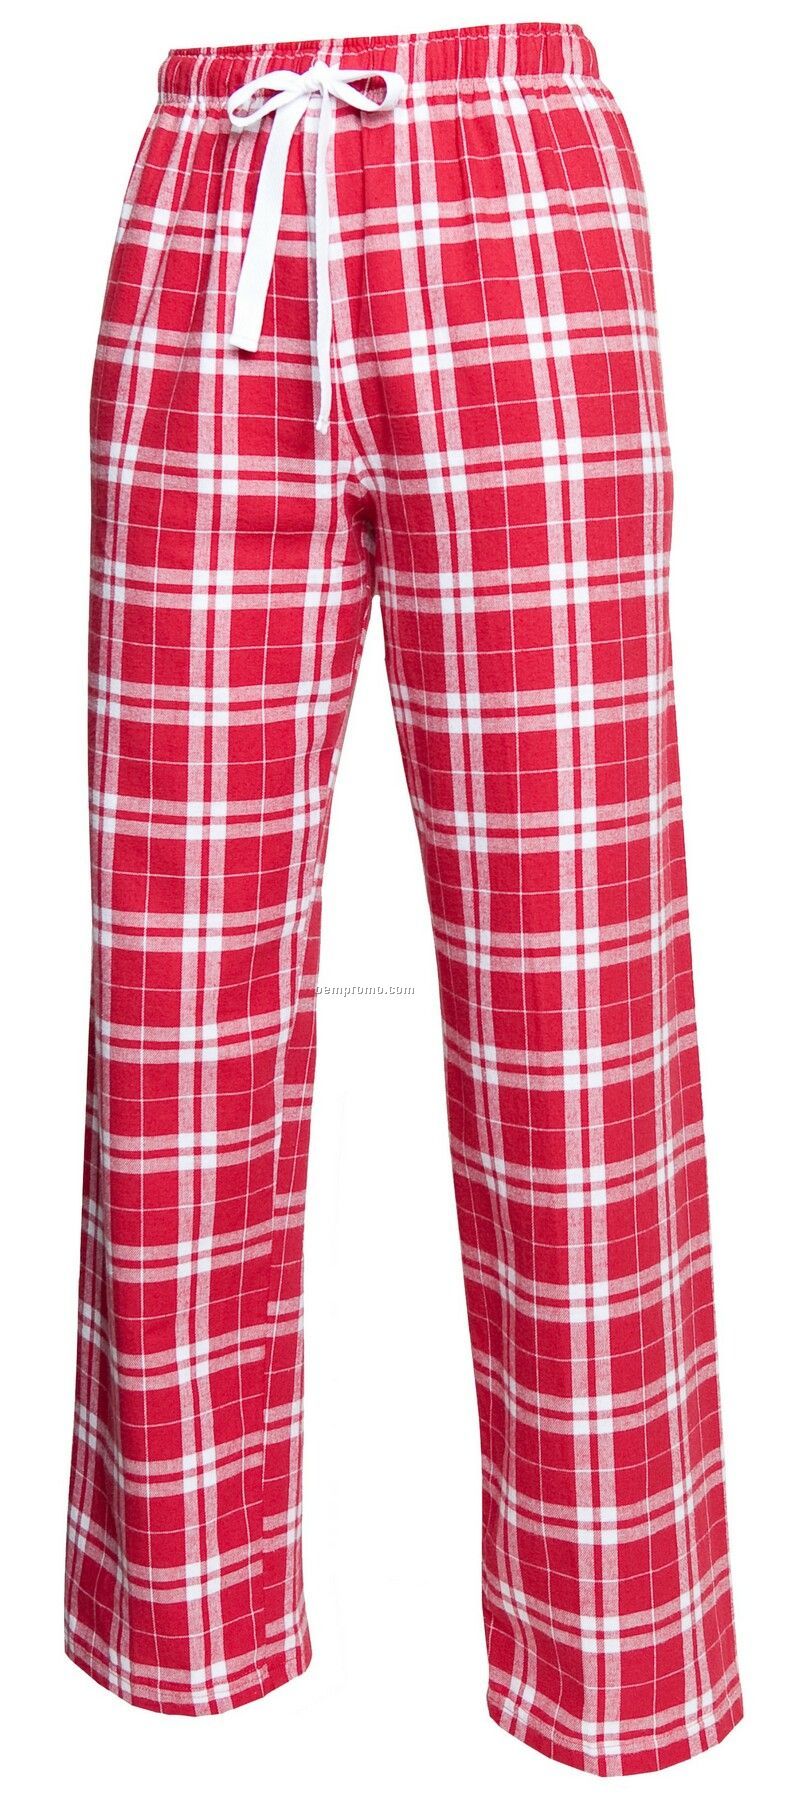 Youth Team Pride Flannel Pant In Cardinal Red & White Plaid